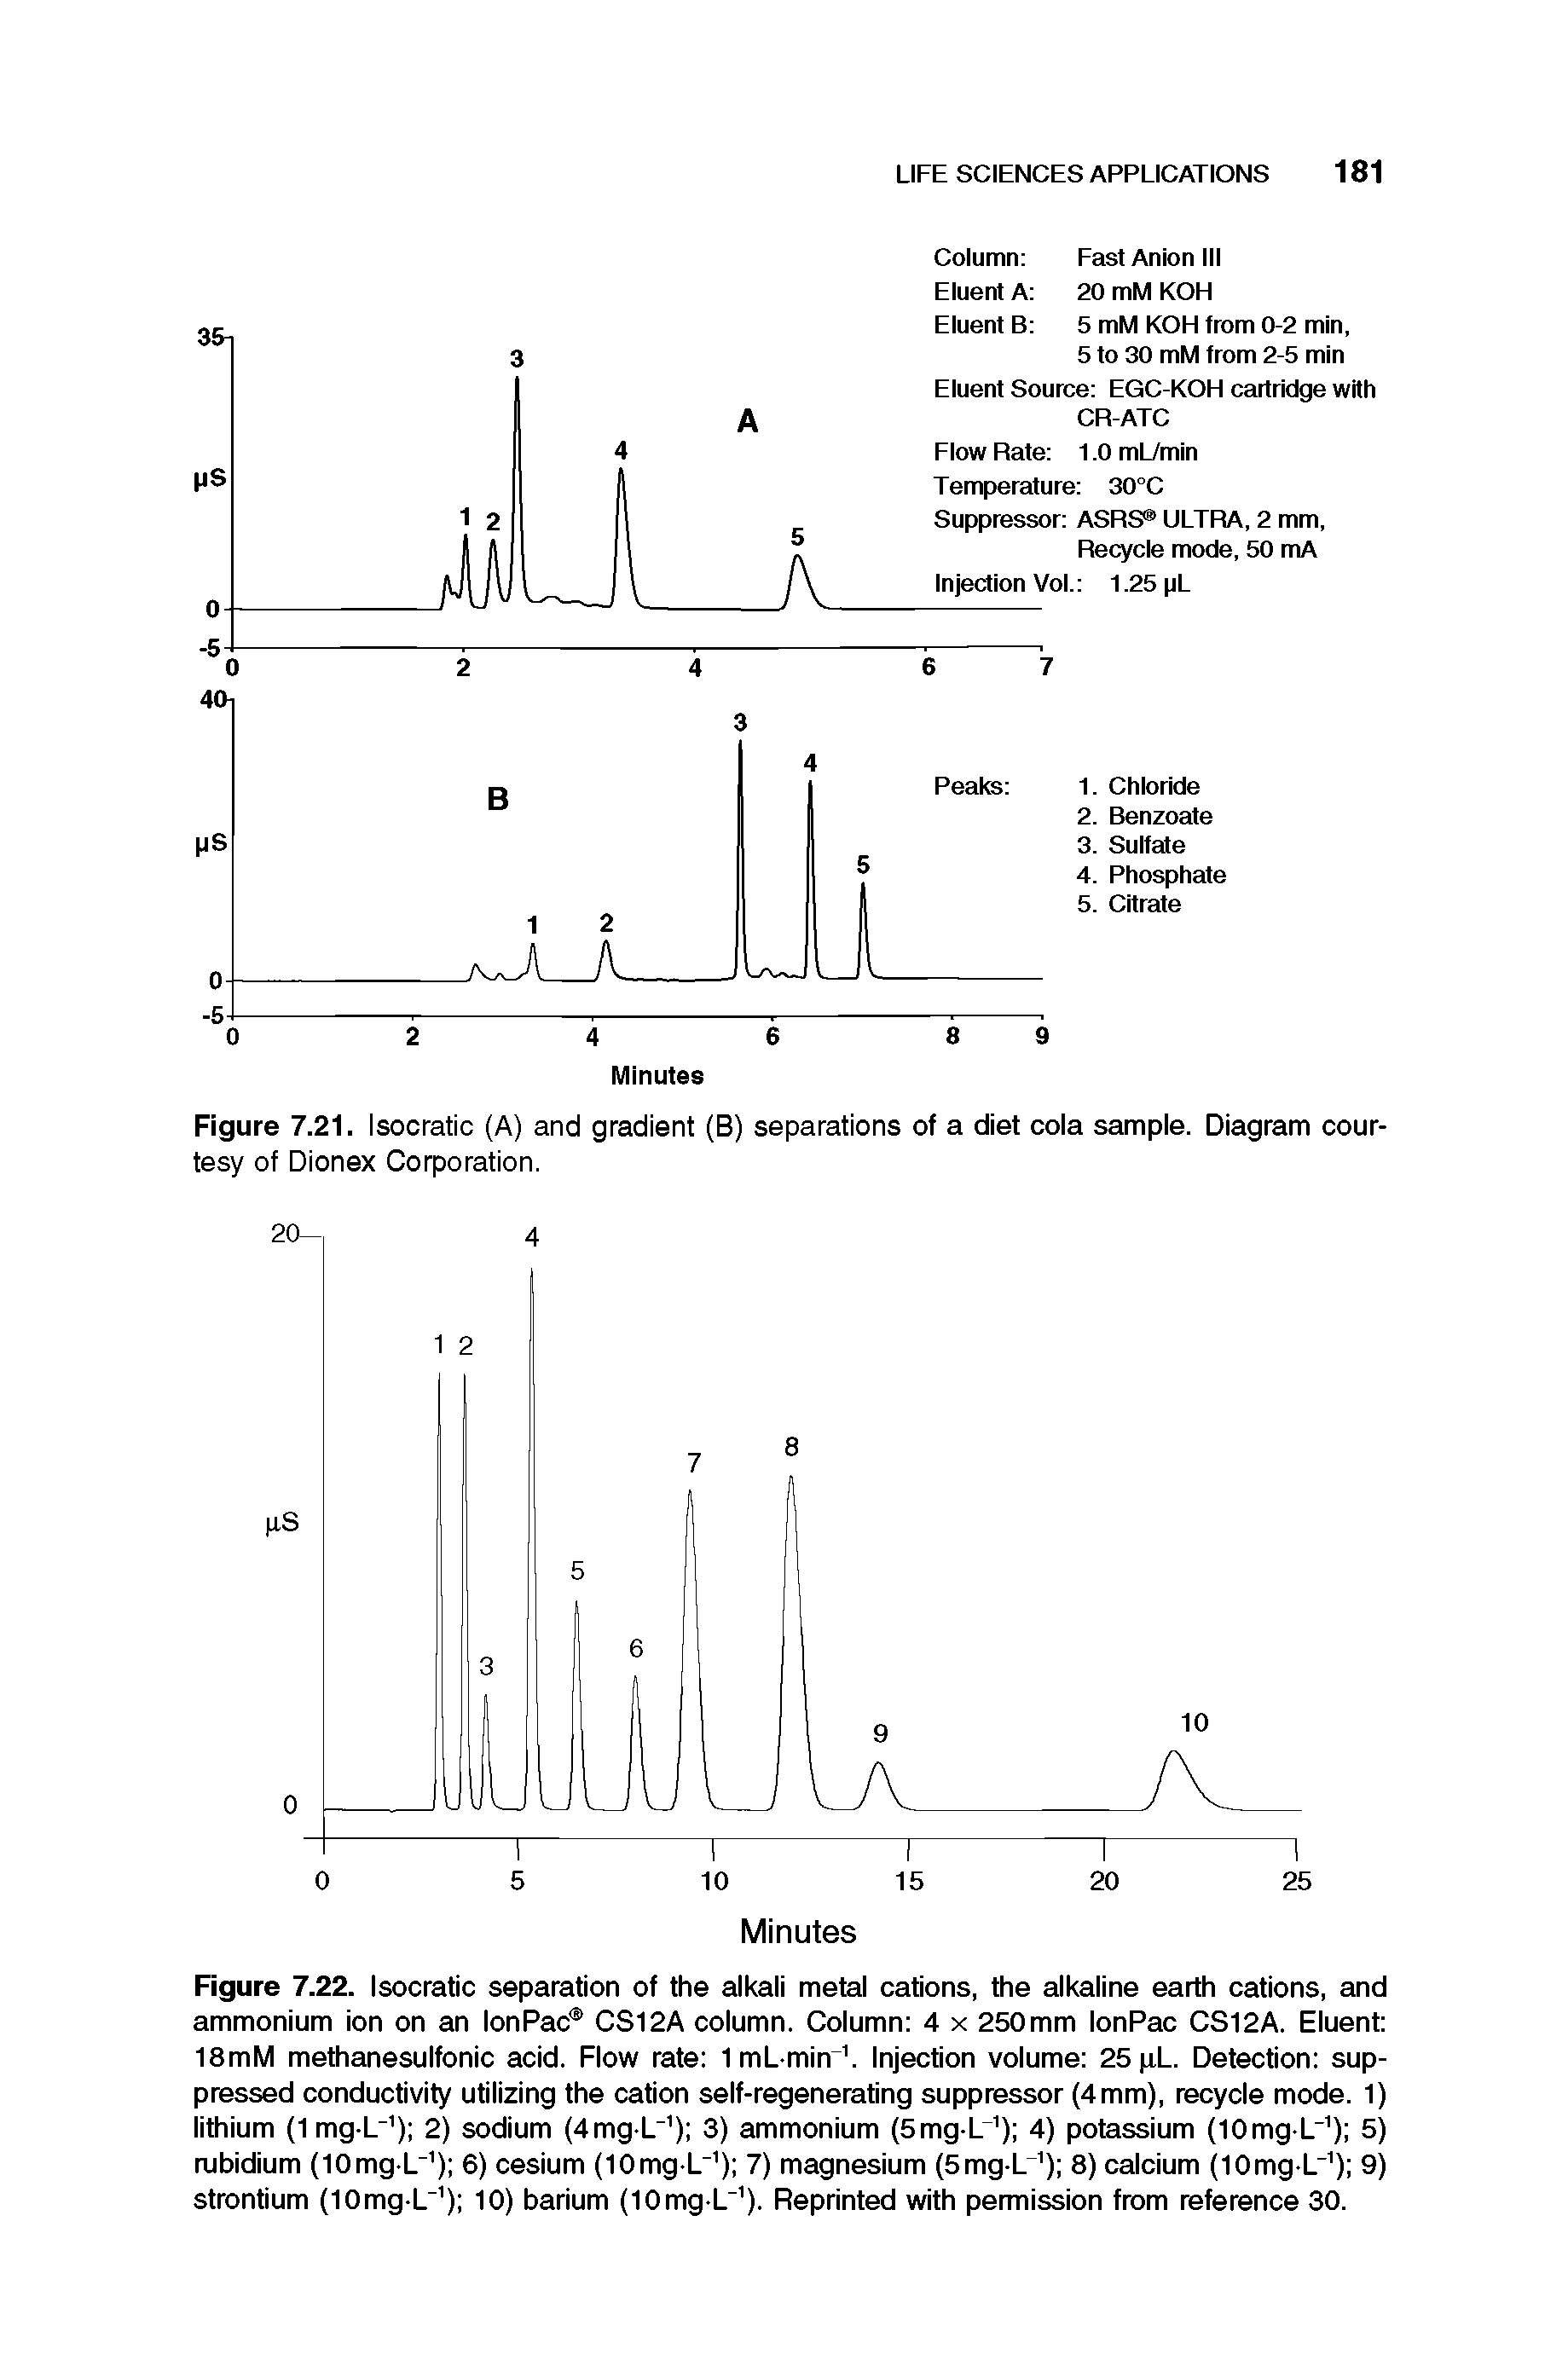 Figure 7.21. Isocratic (A) and gradient (B) separations of a diet cola sample. Diagram courtesy of Dionex Corporation.